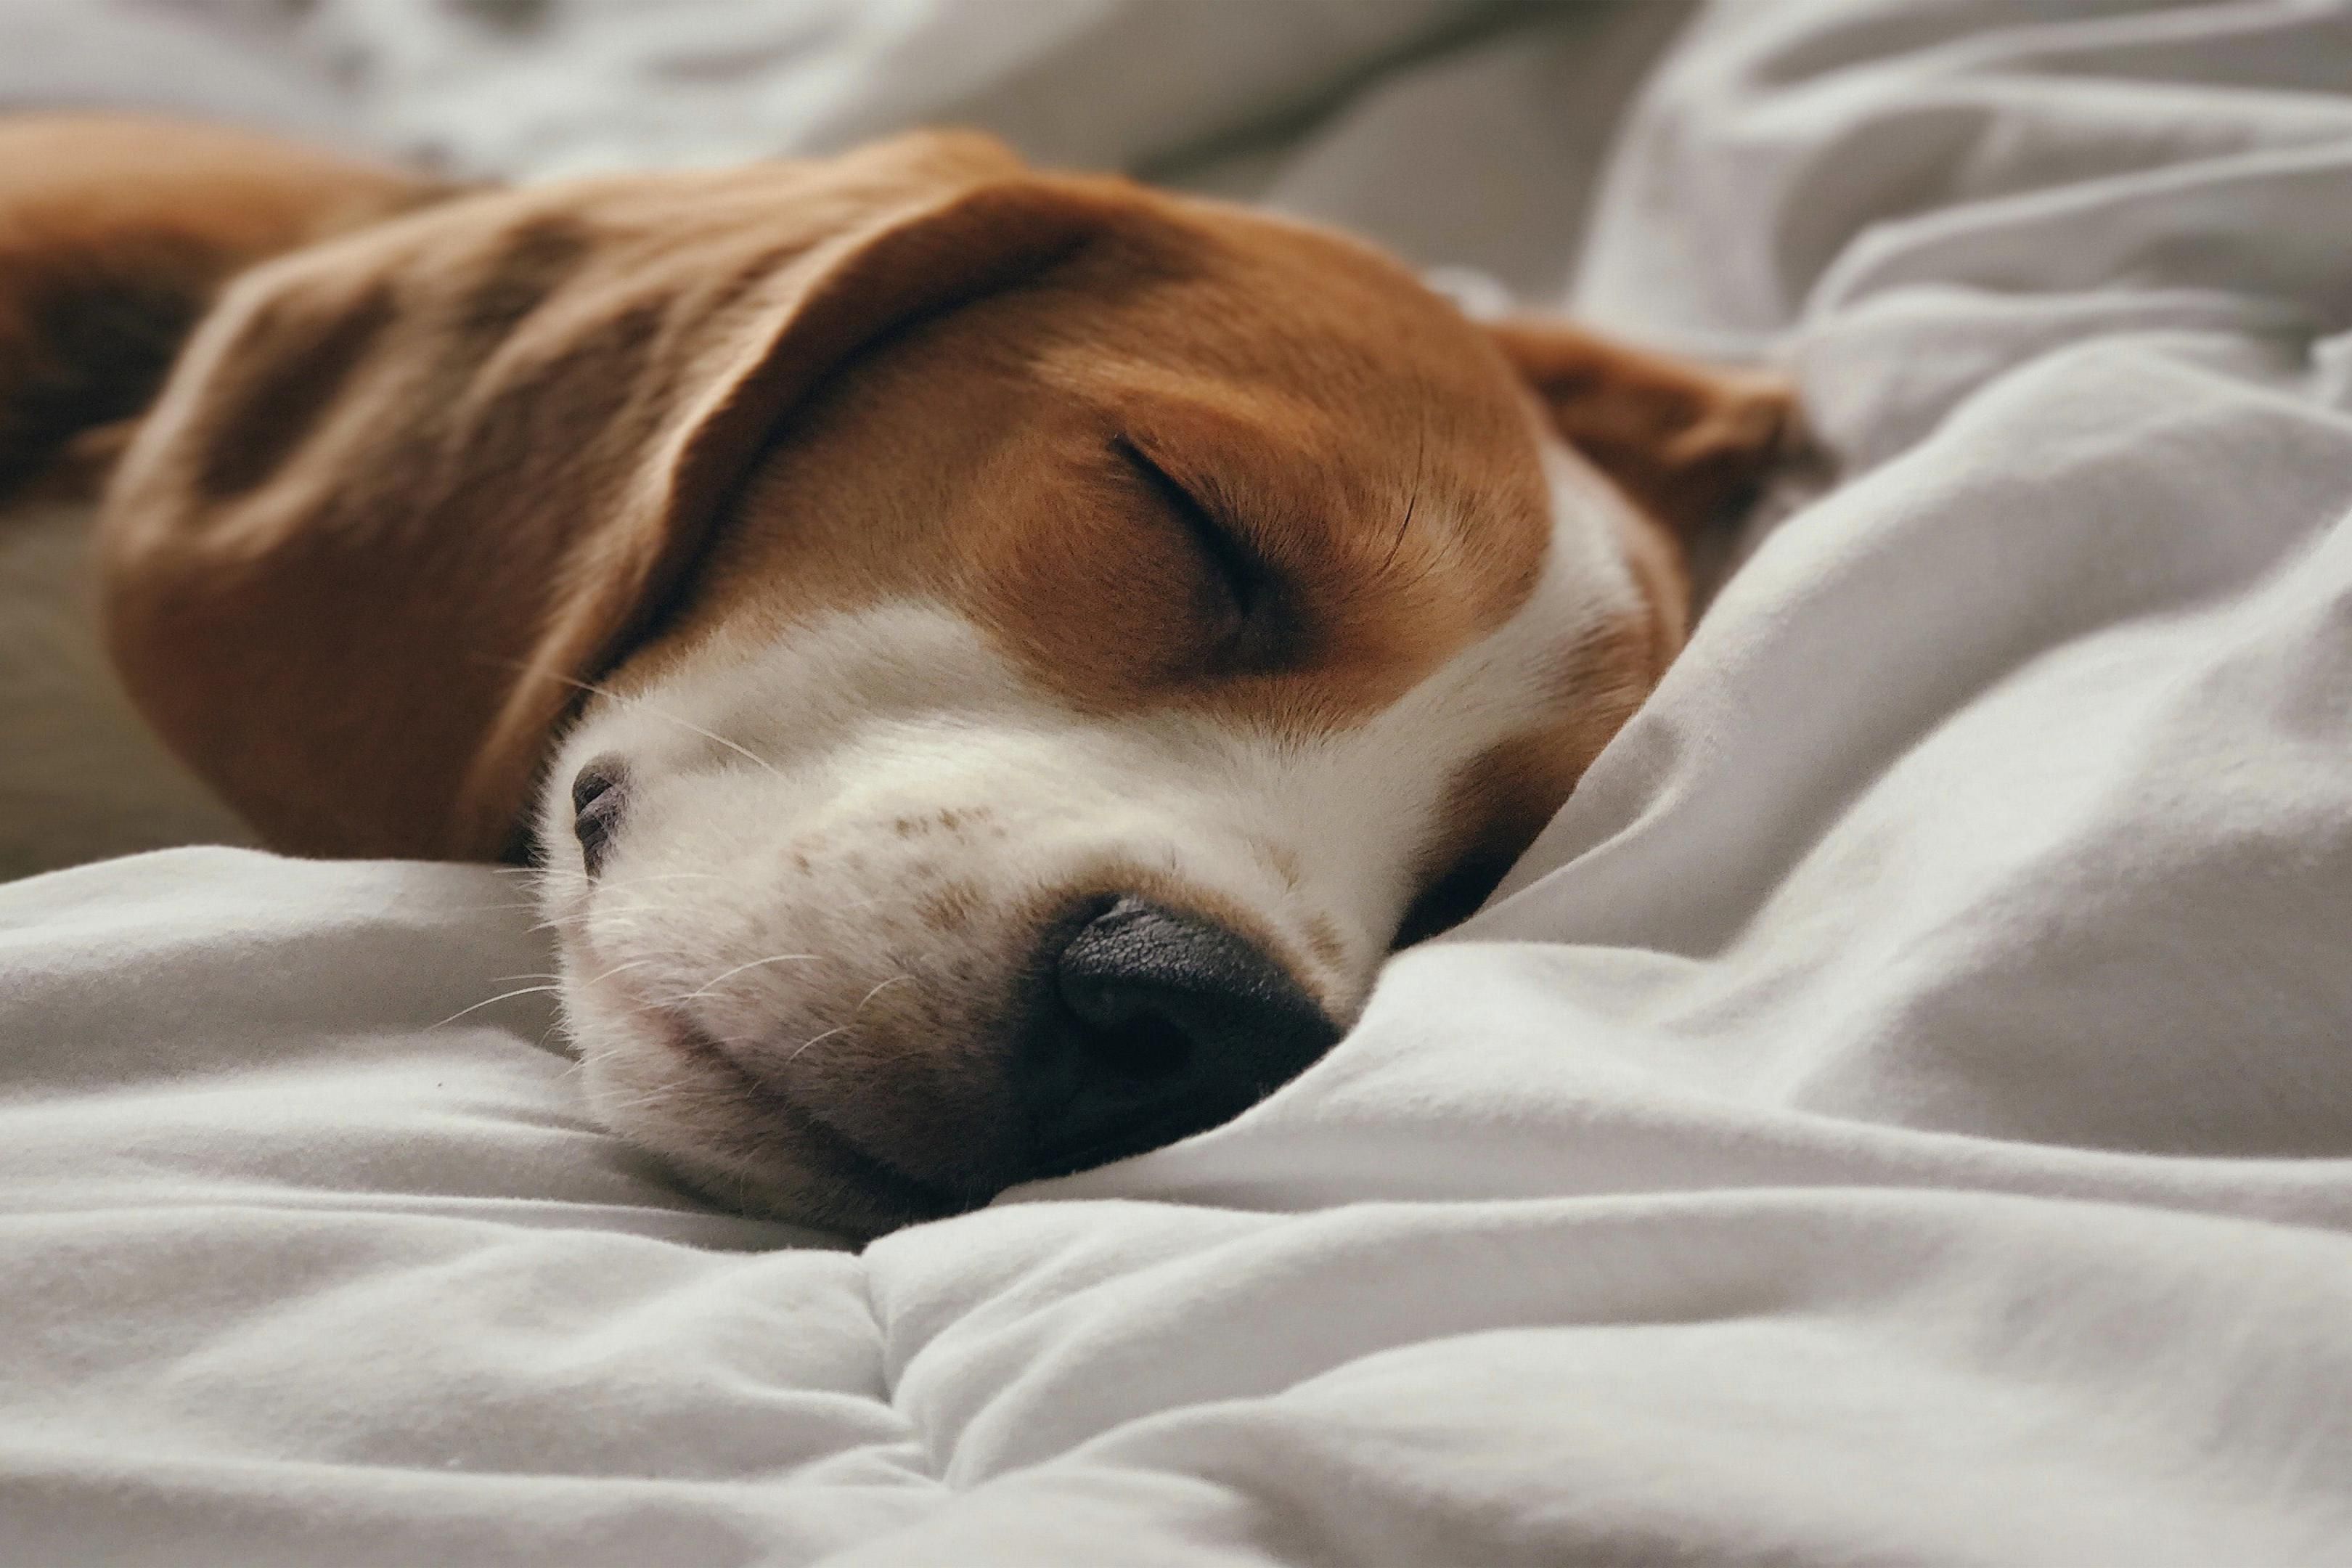 Our hotel warmly welcomes pets so you and your four-legged friend can enjoy a tail-wagging Boston adventure together. With our new pet package, we ensure your pet receives a warm welcome and enjoys a “pawsome” stay.